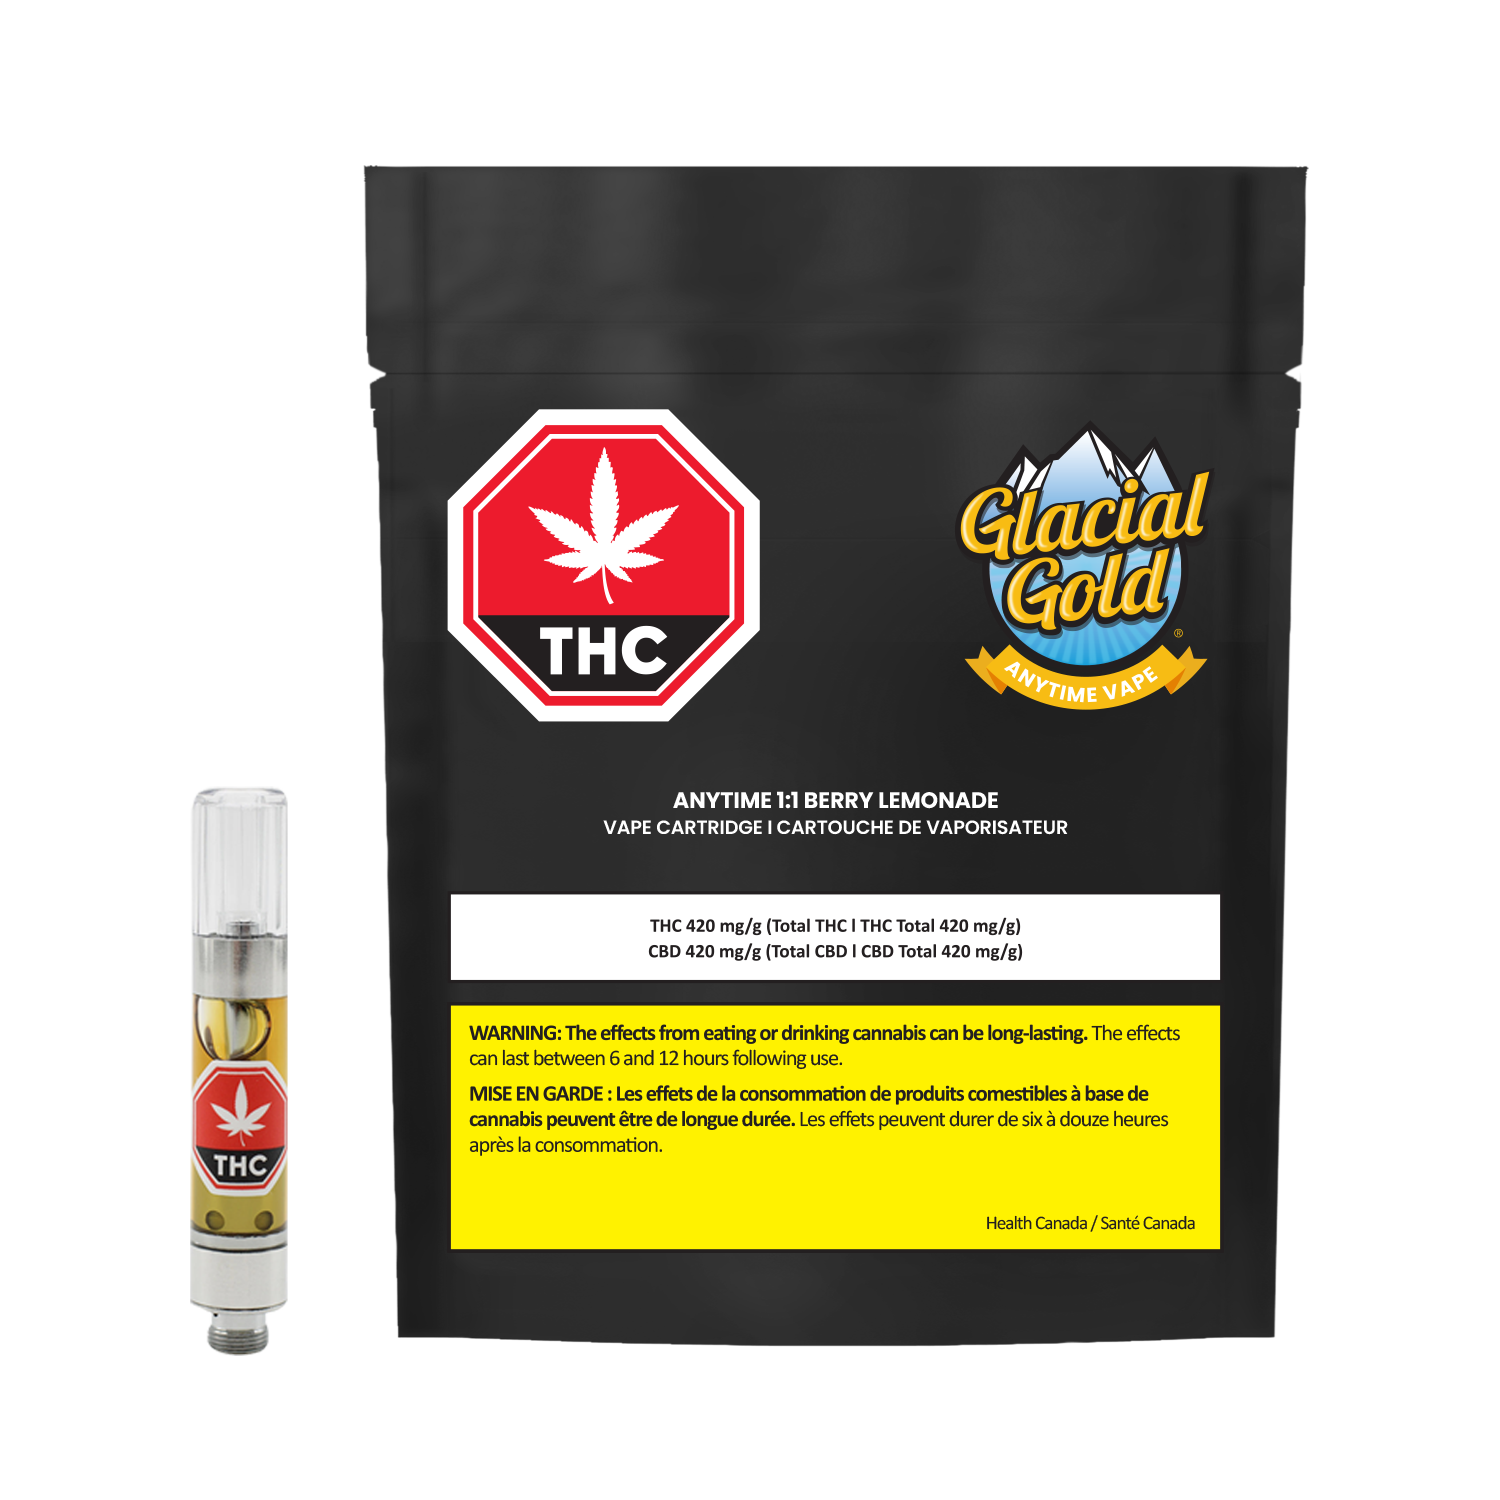 Cannabis Product Glacial Gold - Anytime 1:1 Berry Lemonade 1g Vape by Glacial Gold - 1